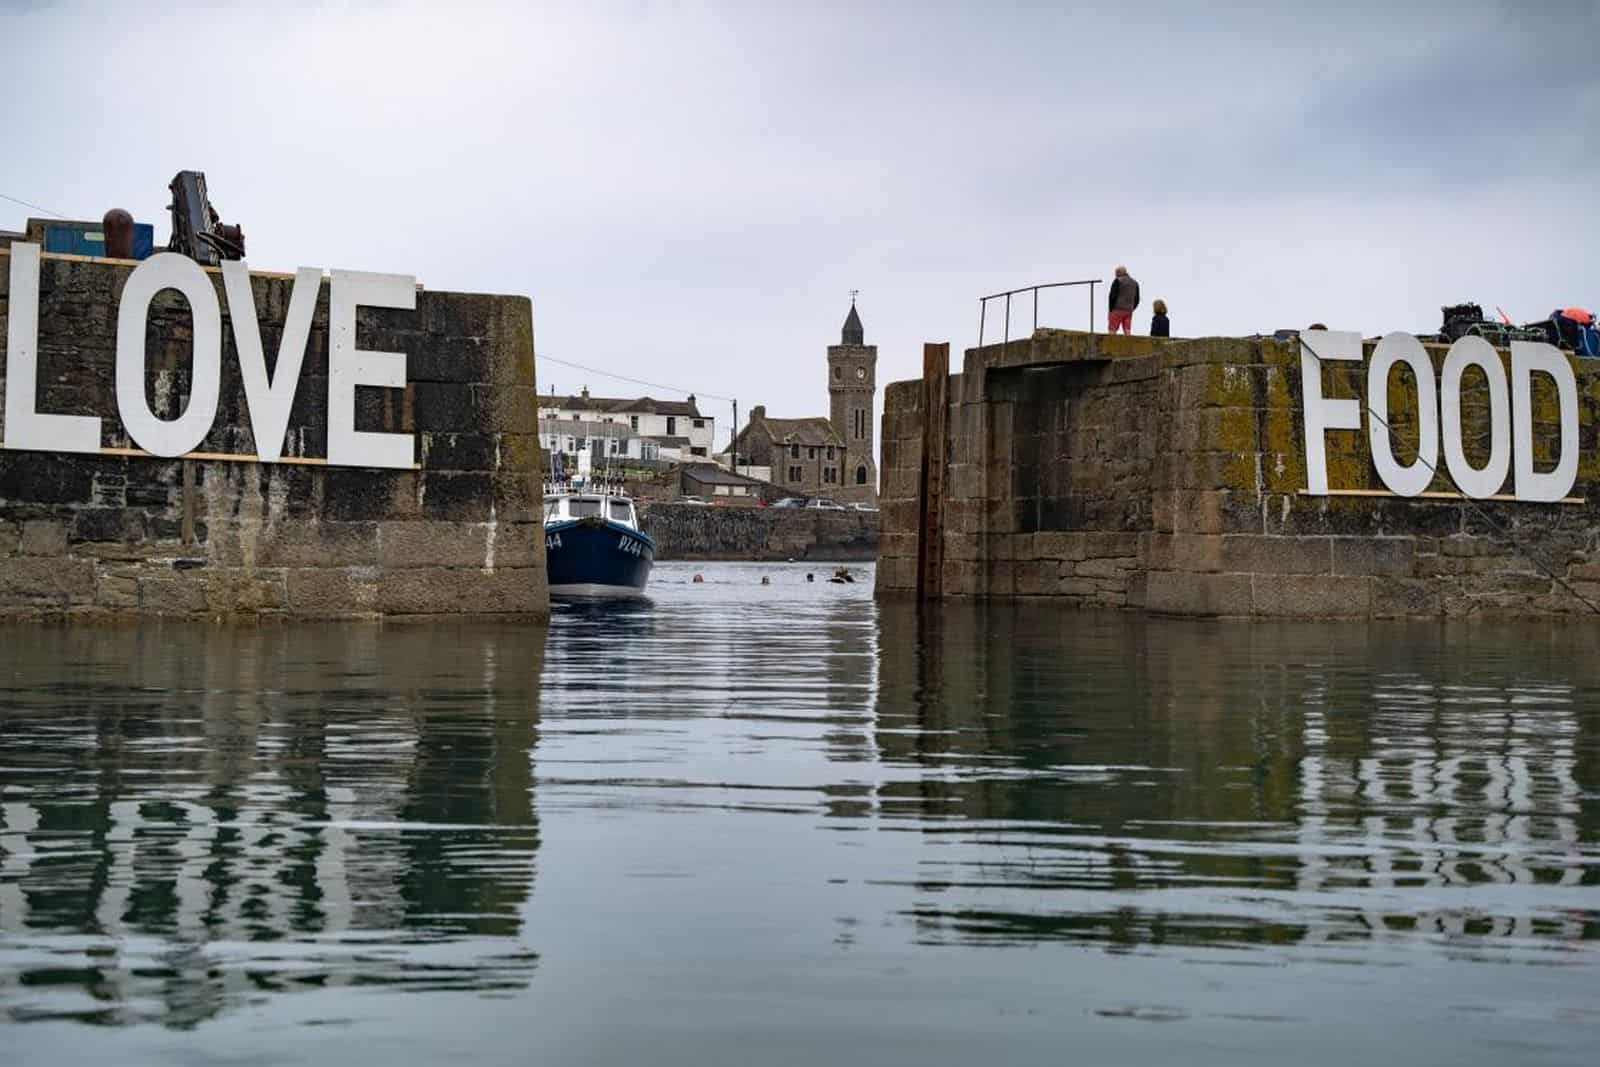 Porthleven Harbour with Love Food sign